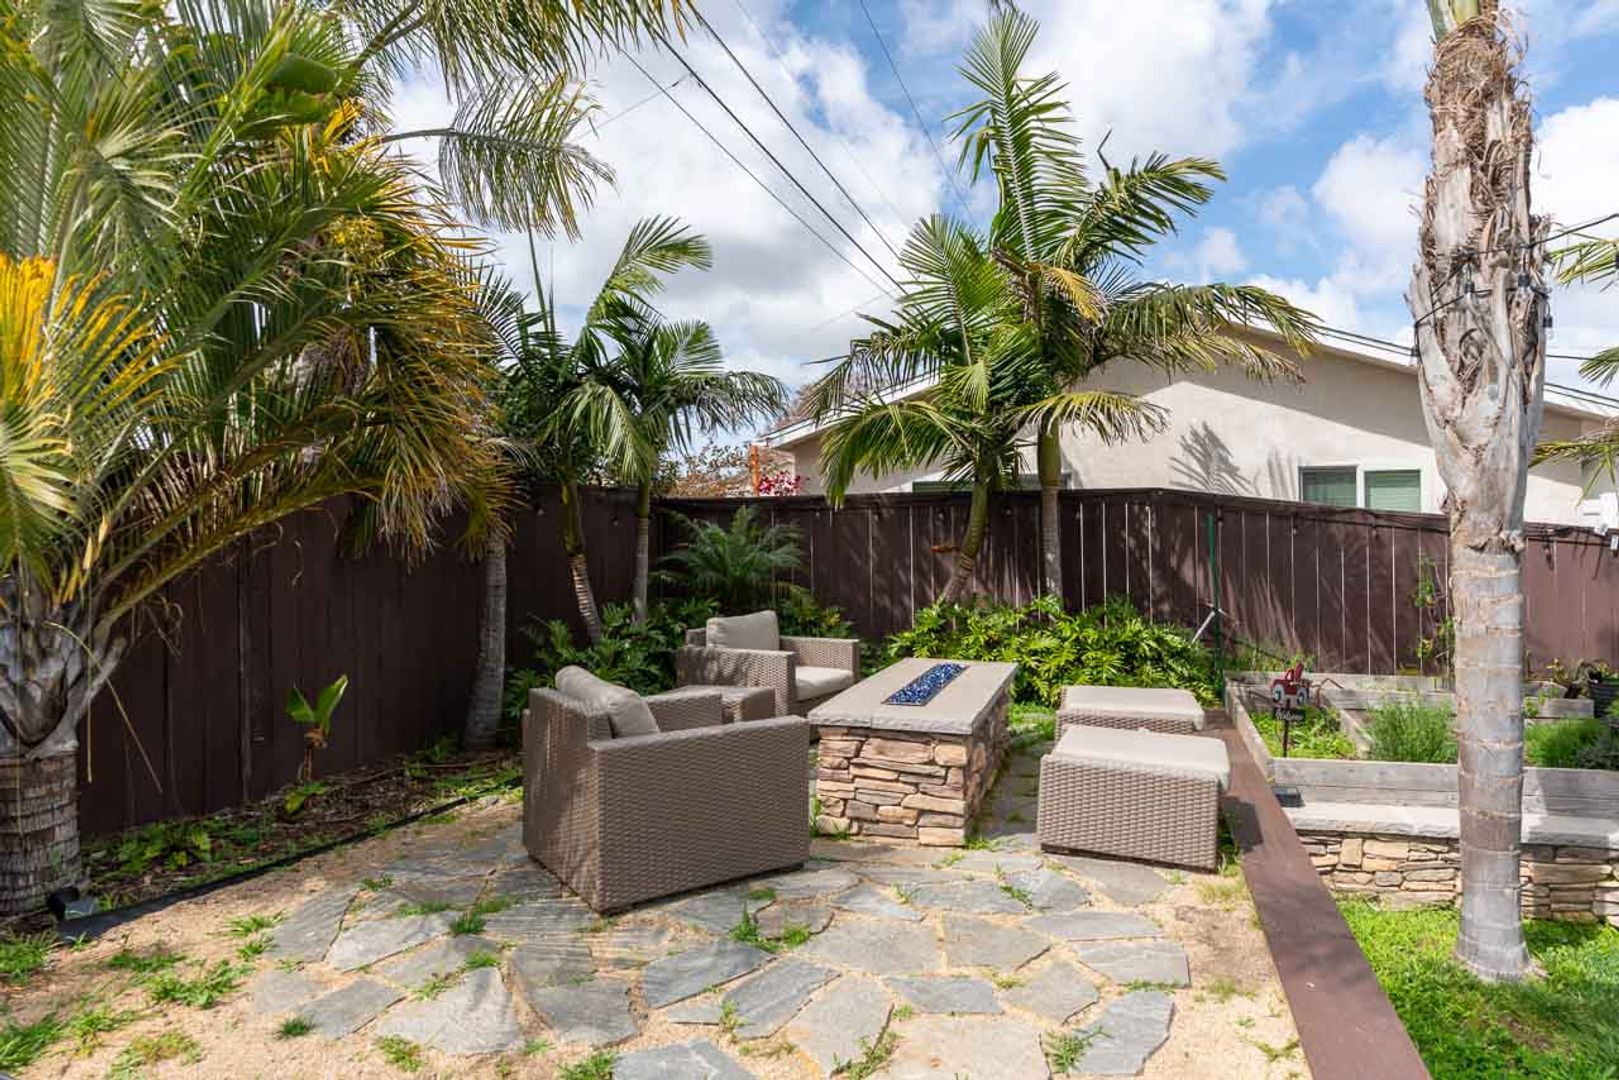 TROPICAL PARADISE *** 3/2*** SOLAR***MOVE IN READY***PET FRIENDLY!!!